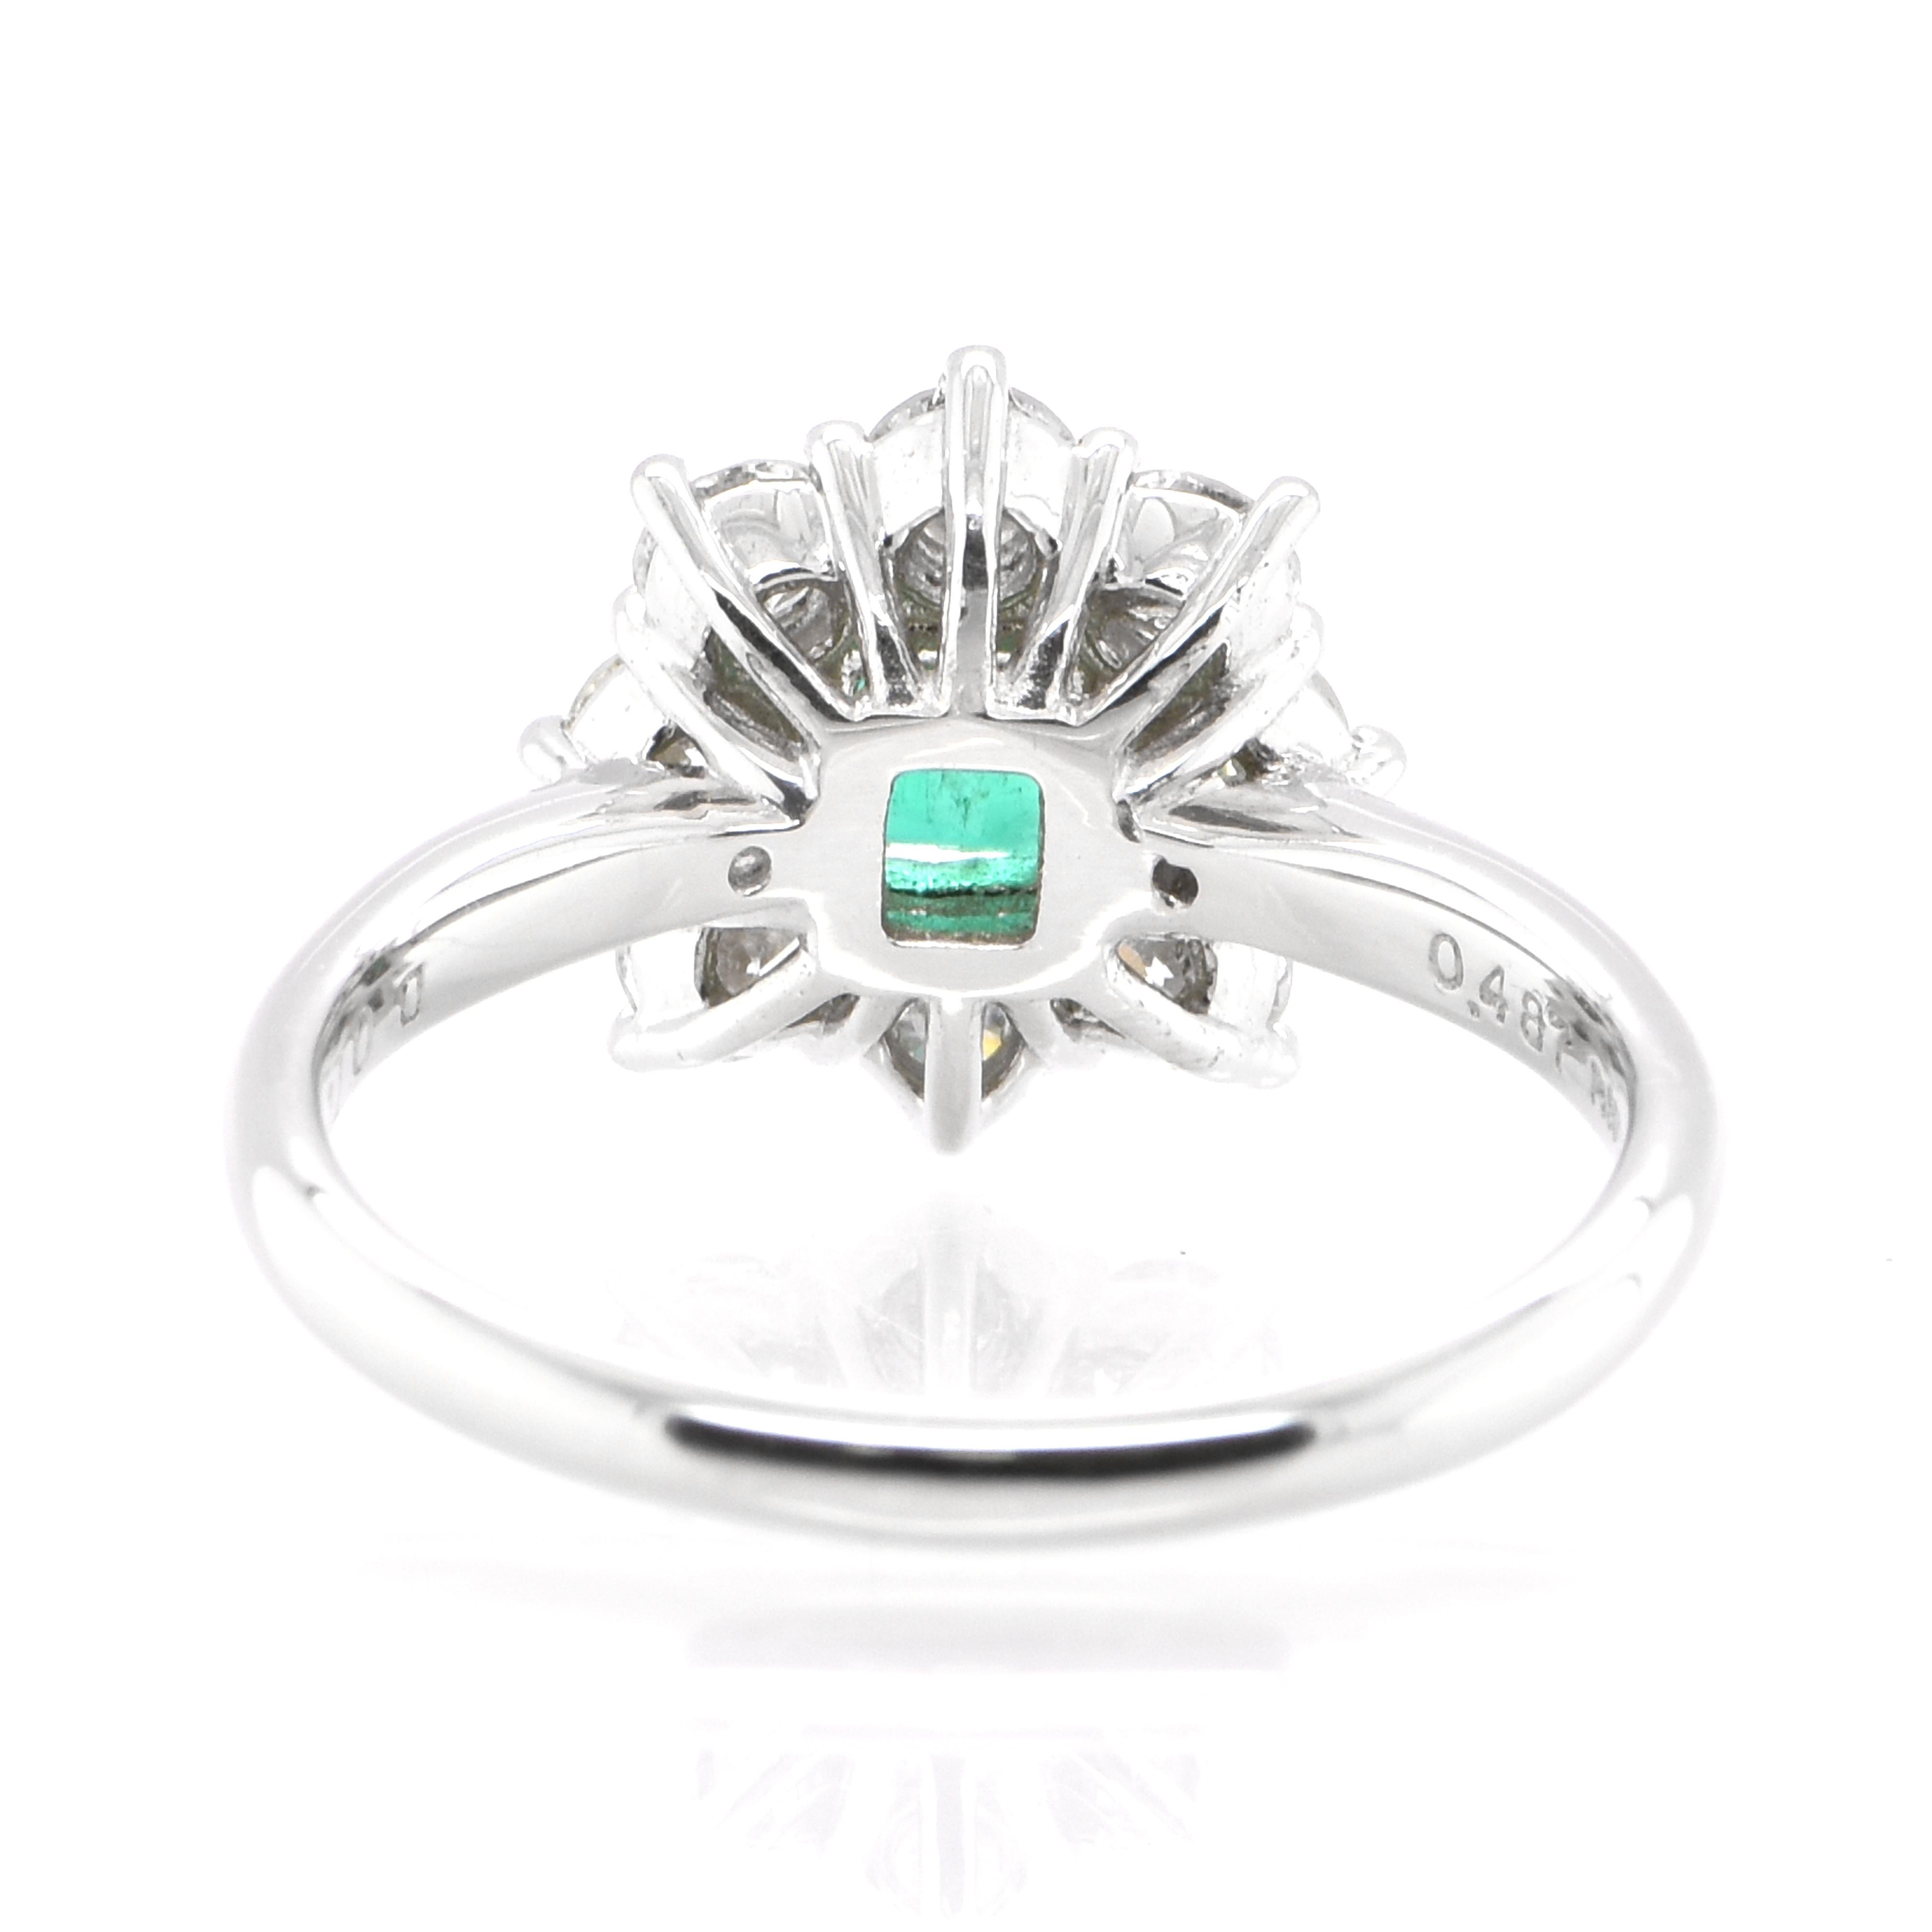 0.48 Carat Natural Colombian Emerald and Diamond Ring Set in Platinum For Sale 1